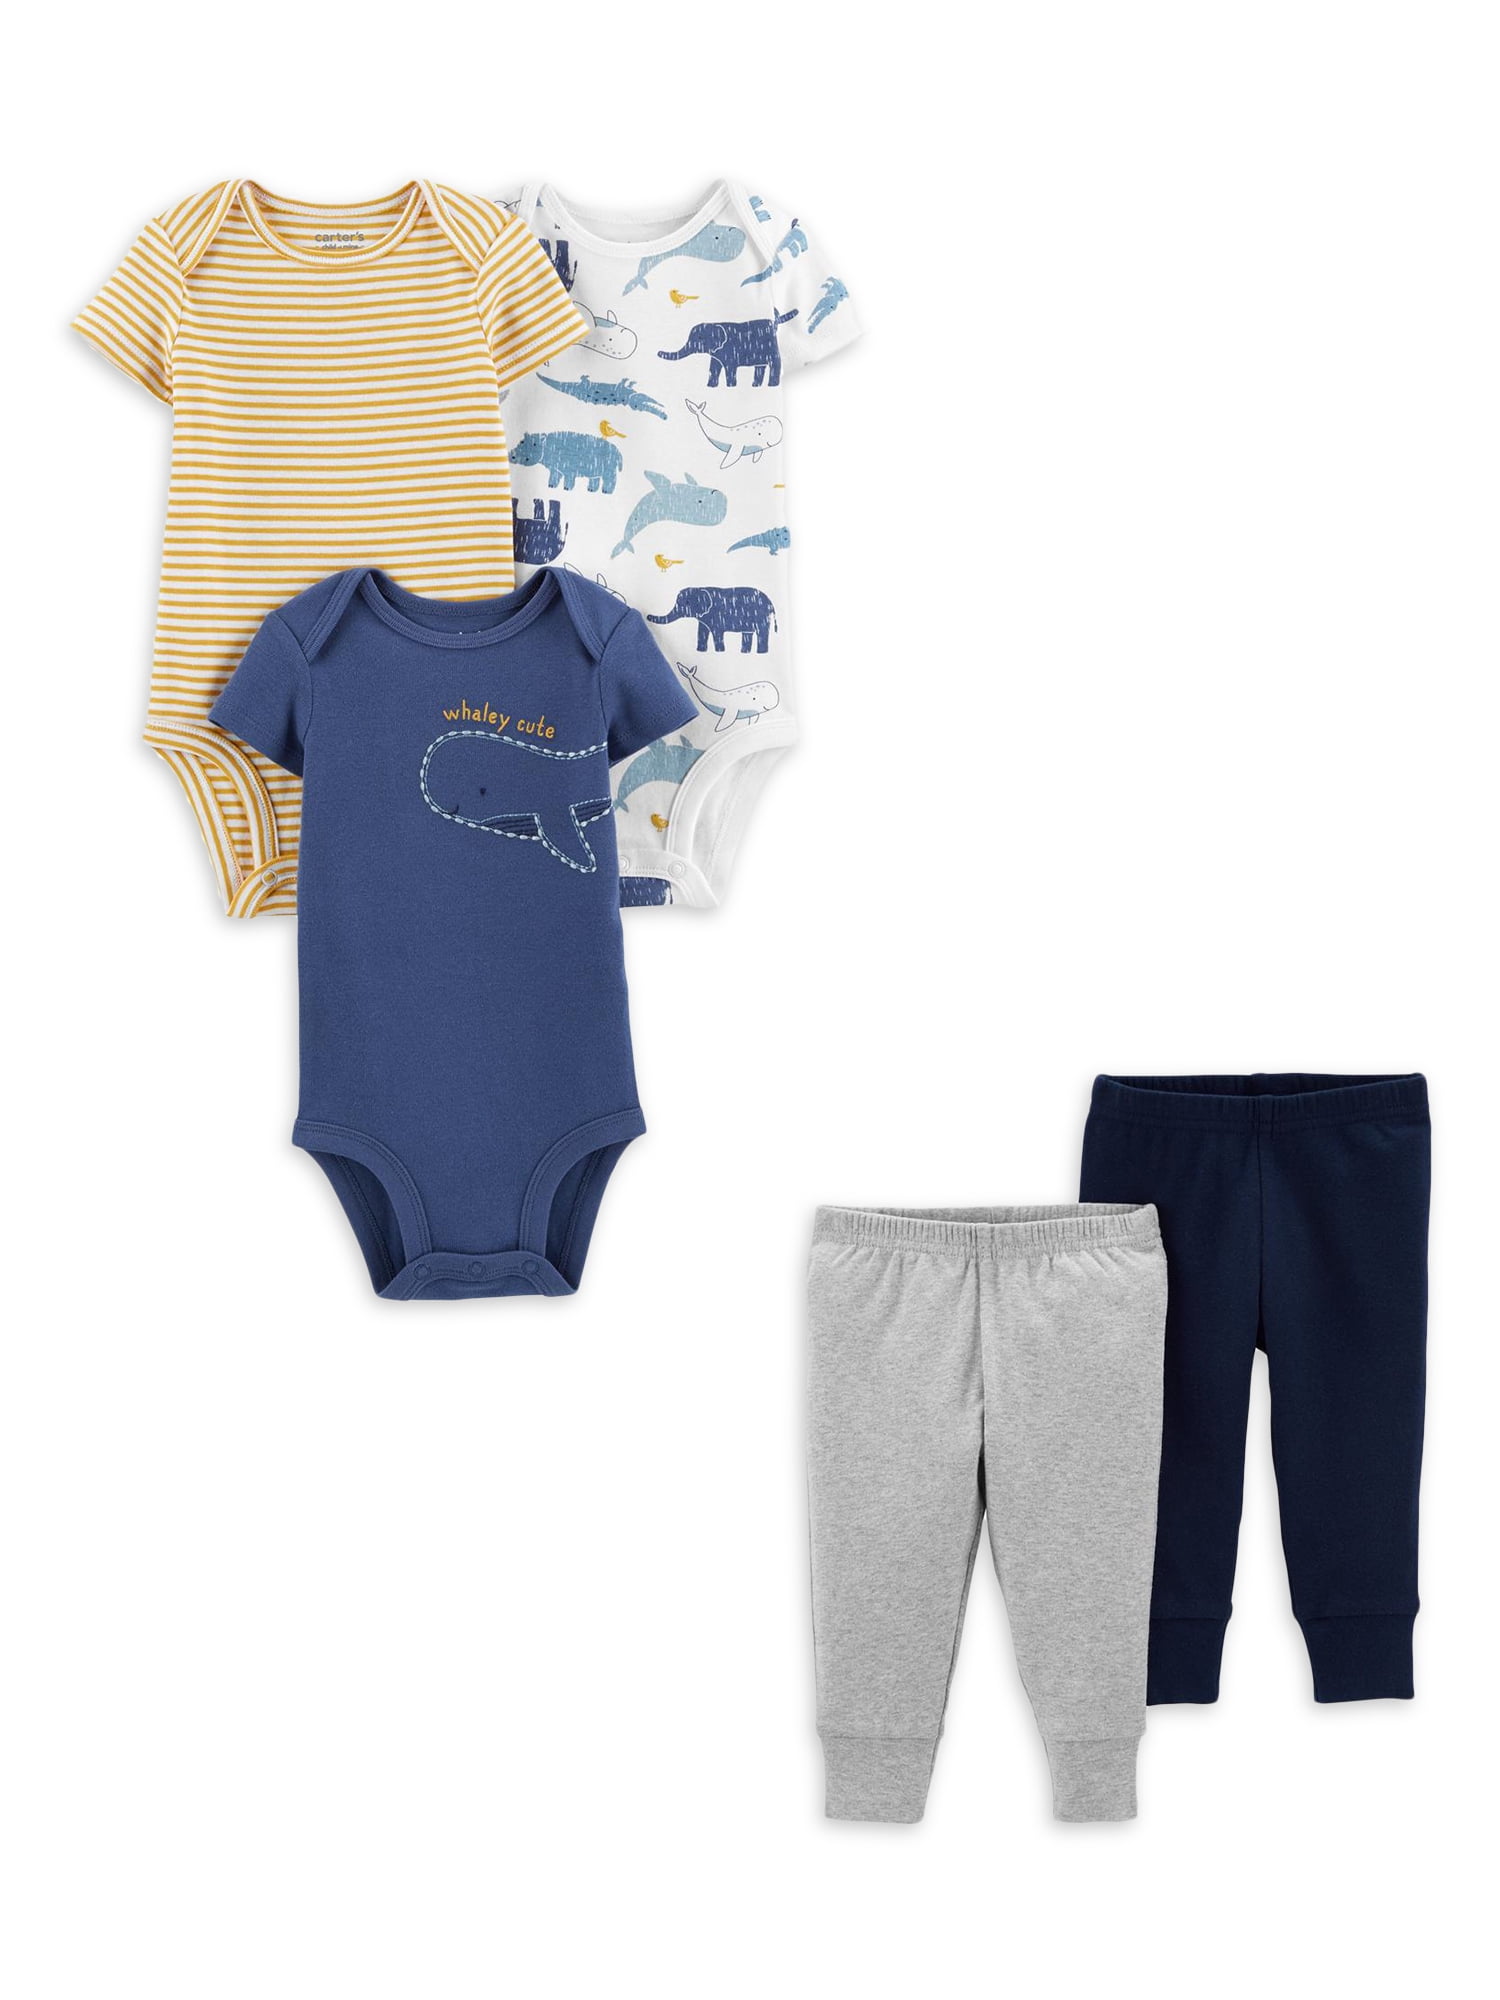 Carter's Child of Mine Baby Boys Bodysuit & Pants Outfit Set, 5